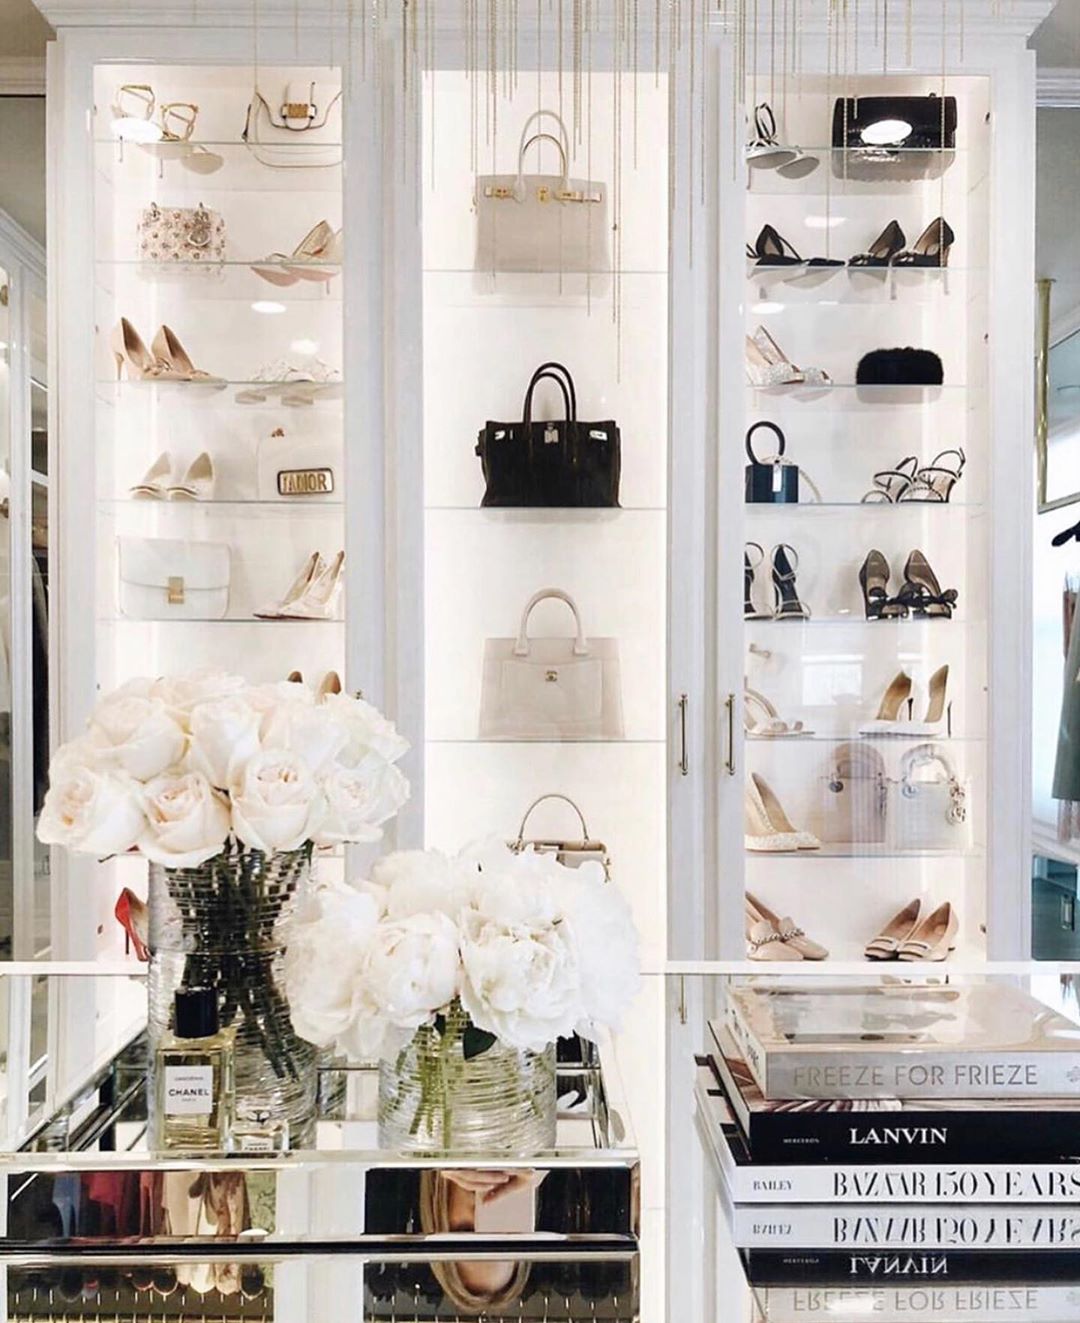 Shoes and purses in luxury closet. Photo by Instagram user @laclosetdesign